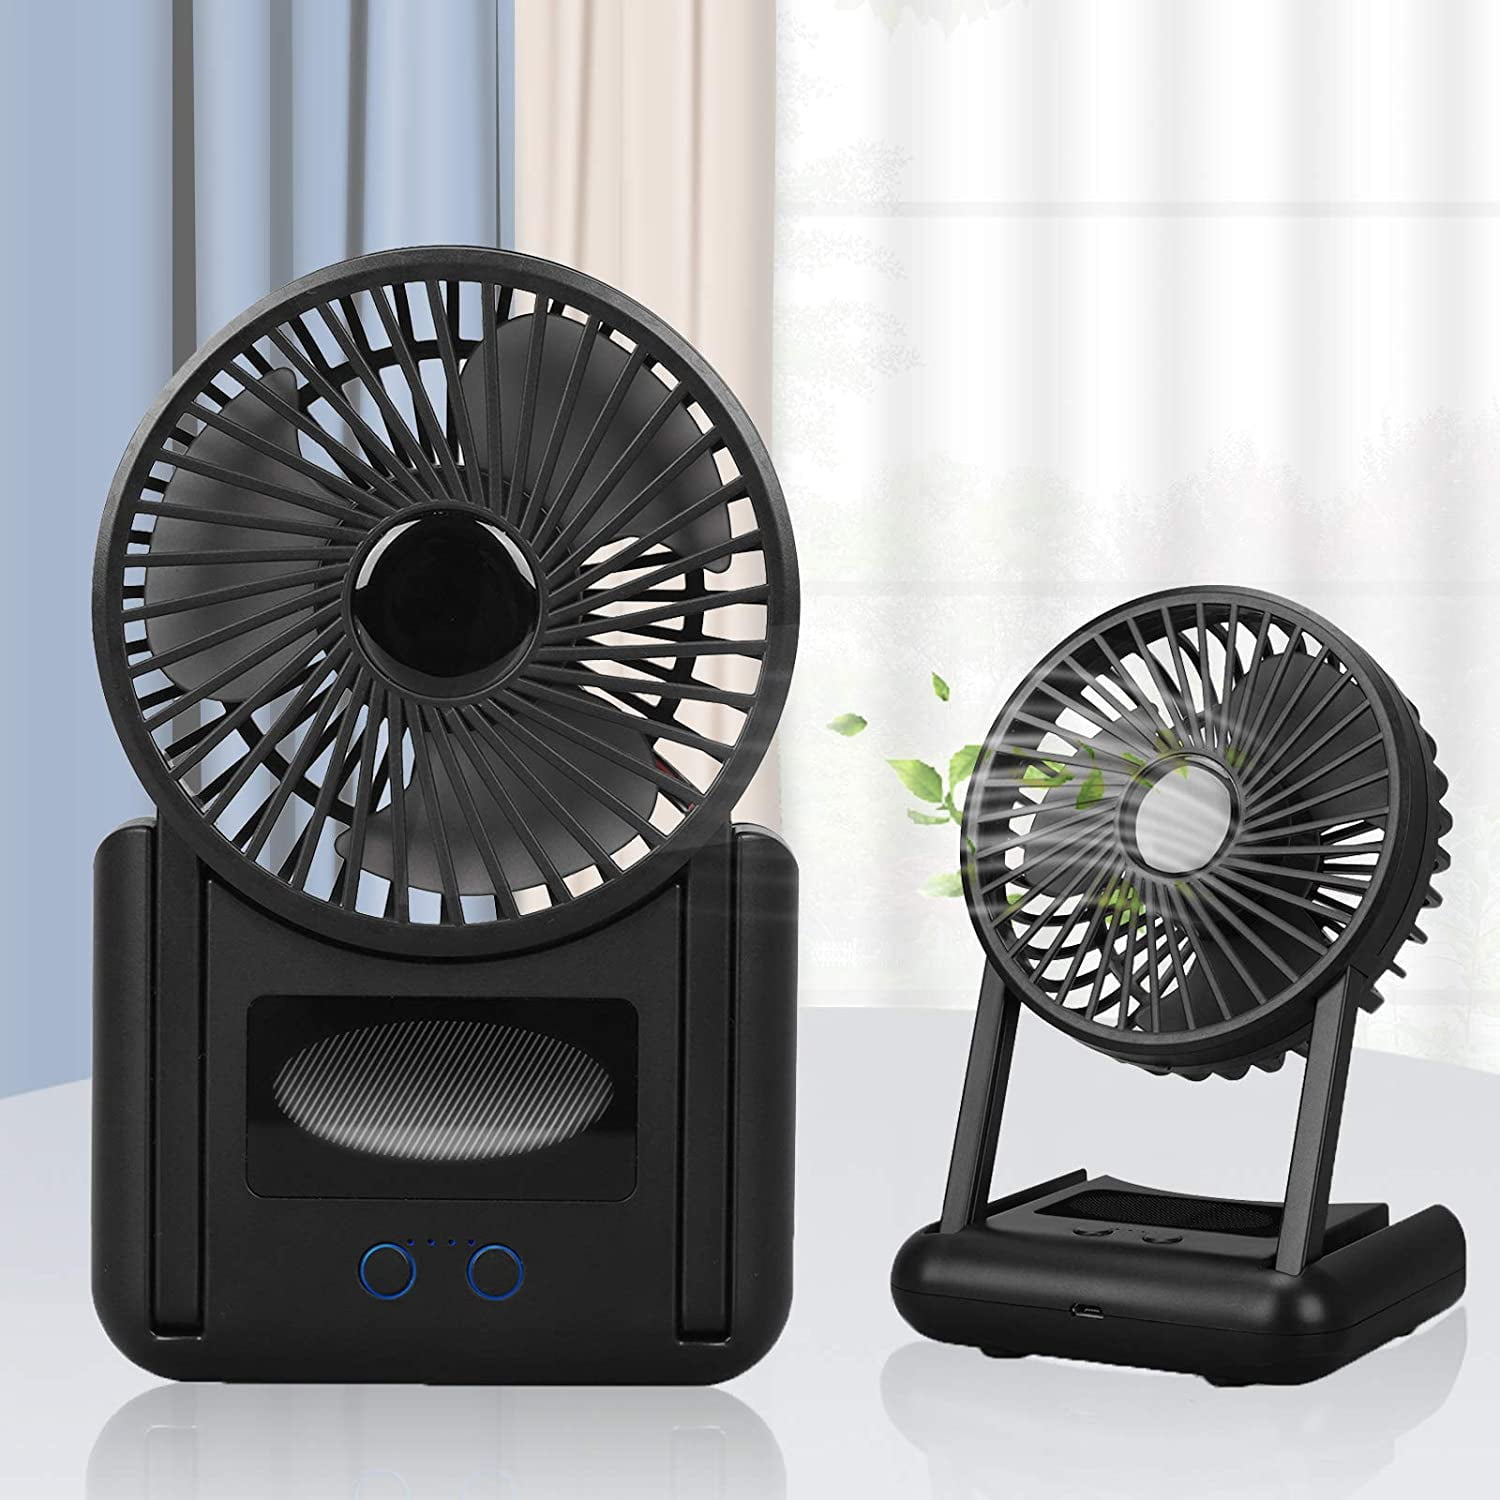 Electric fan Portable Summer Dormitory Bed Silent Fan USB Small Desktop Dormitory Office Desk Silent High Wind Power Rechargeable Long Battery Life